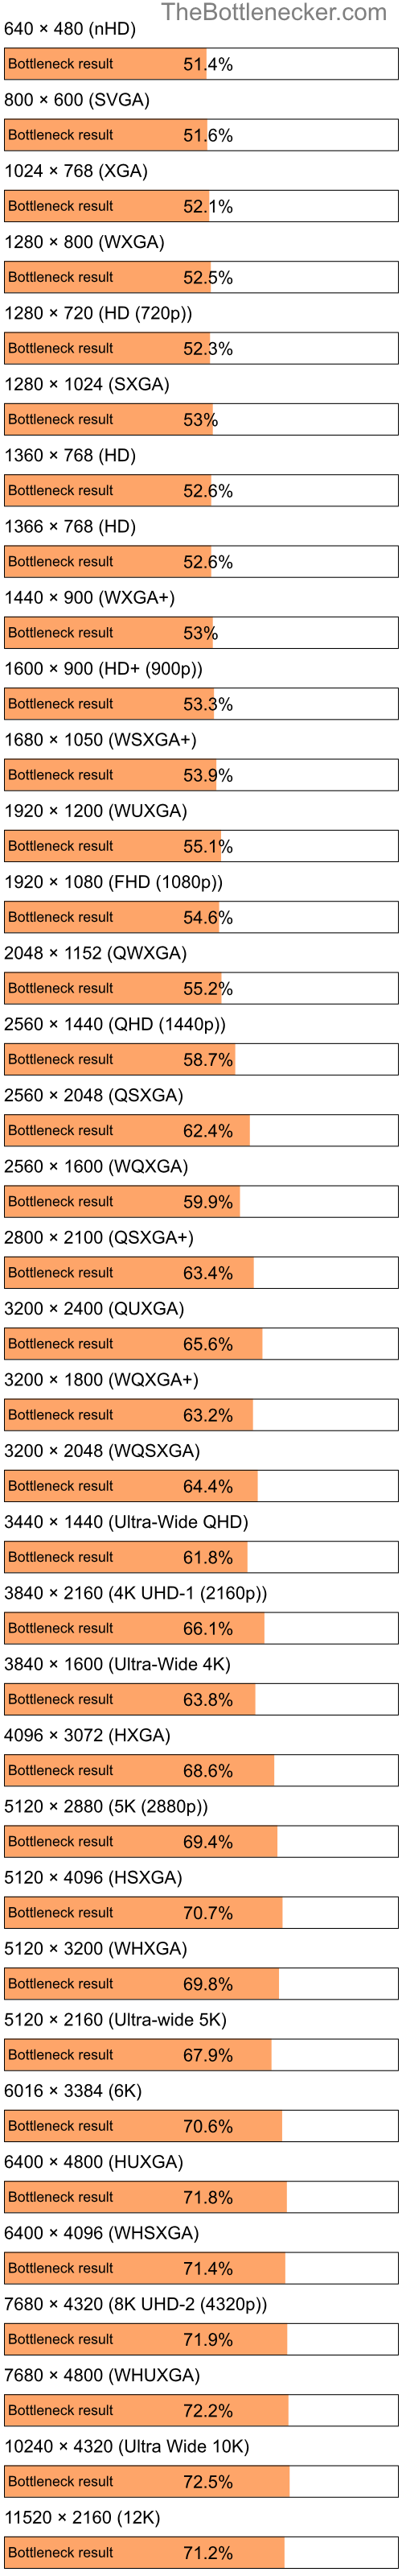 Bottleneck results by resolution for Intel Celeron and AMD Mobility Radeon HD 3450 in Processor Intense Tasks